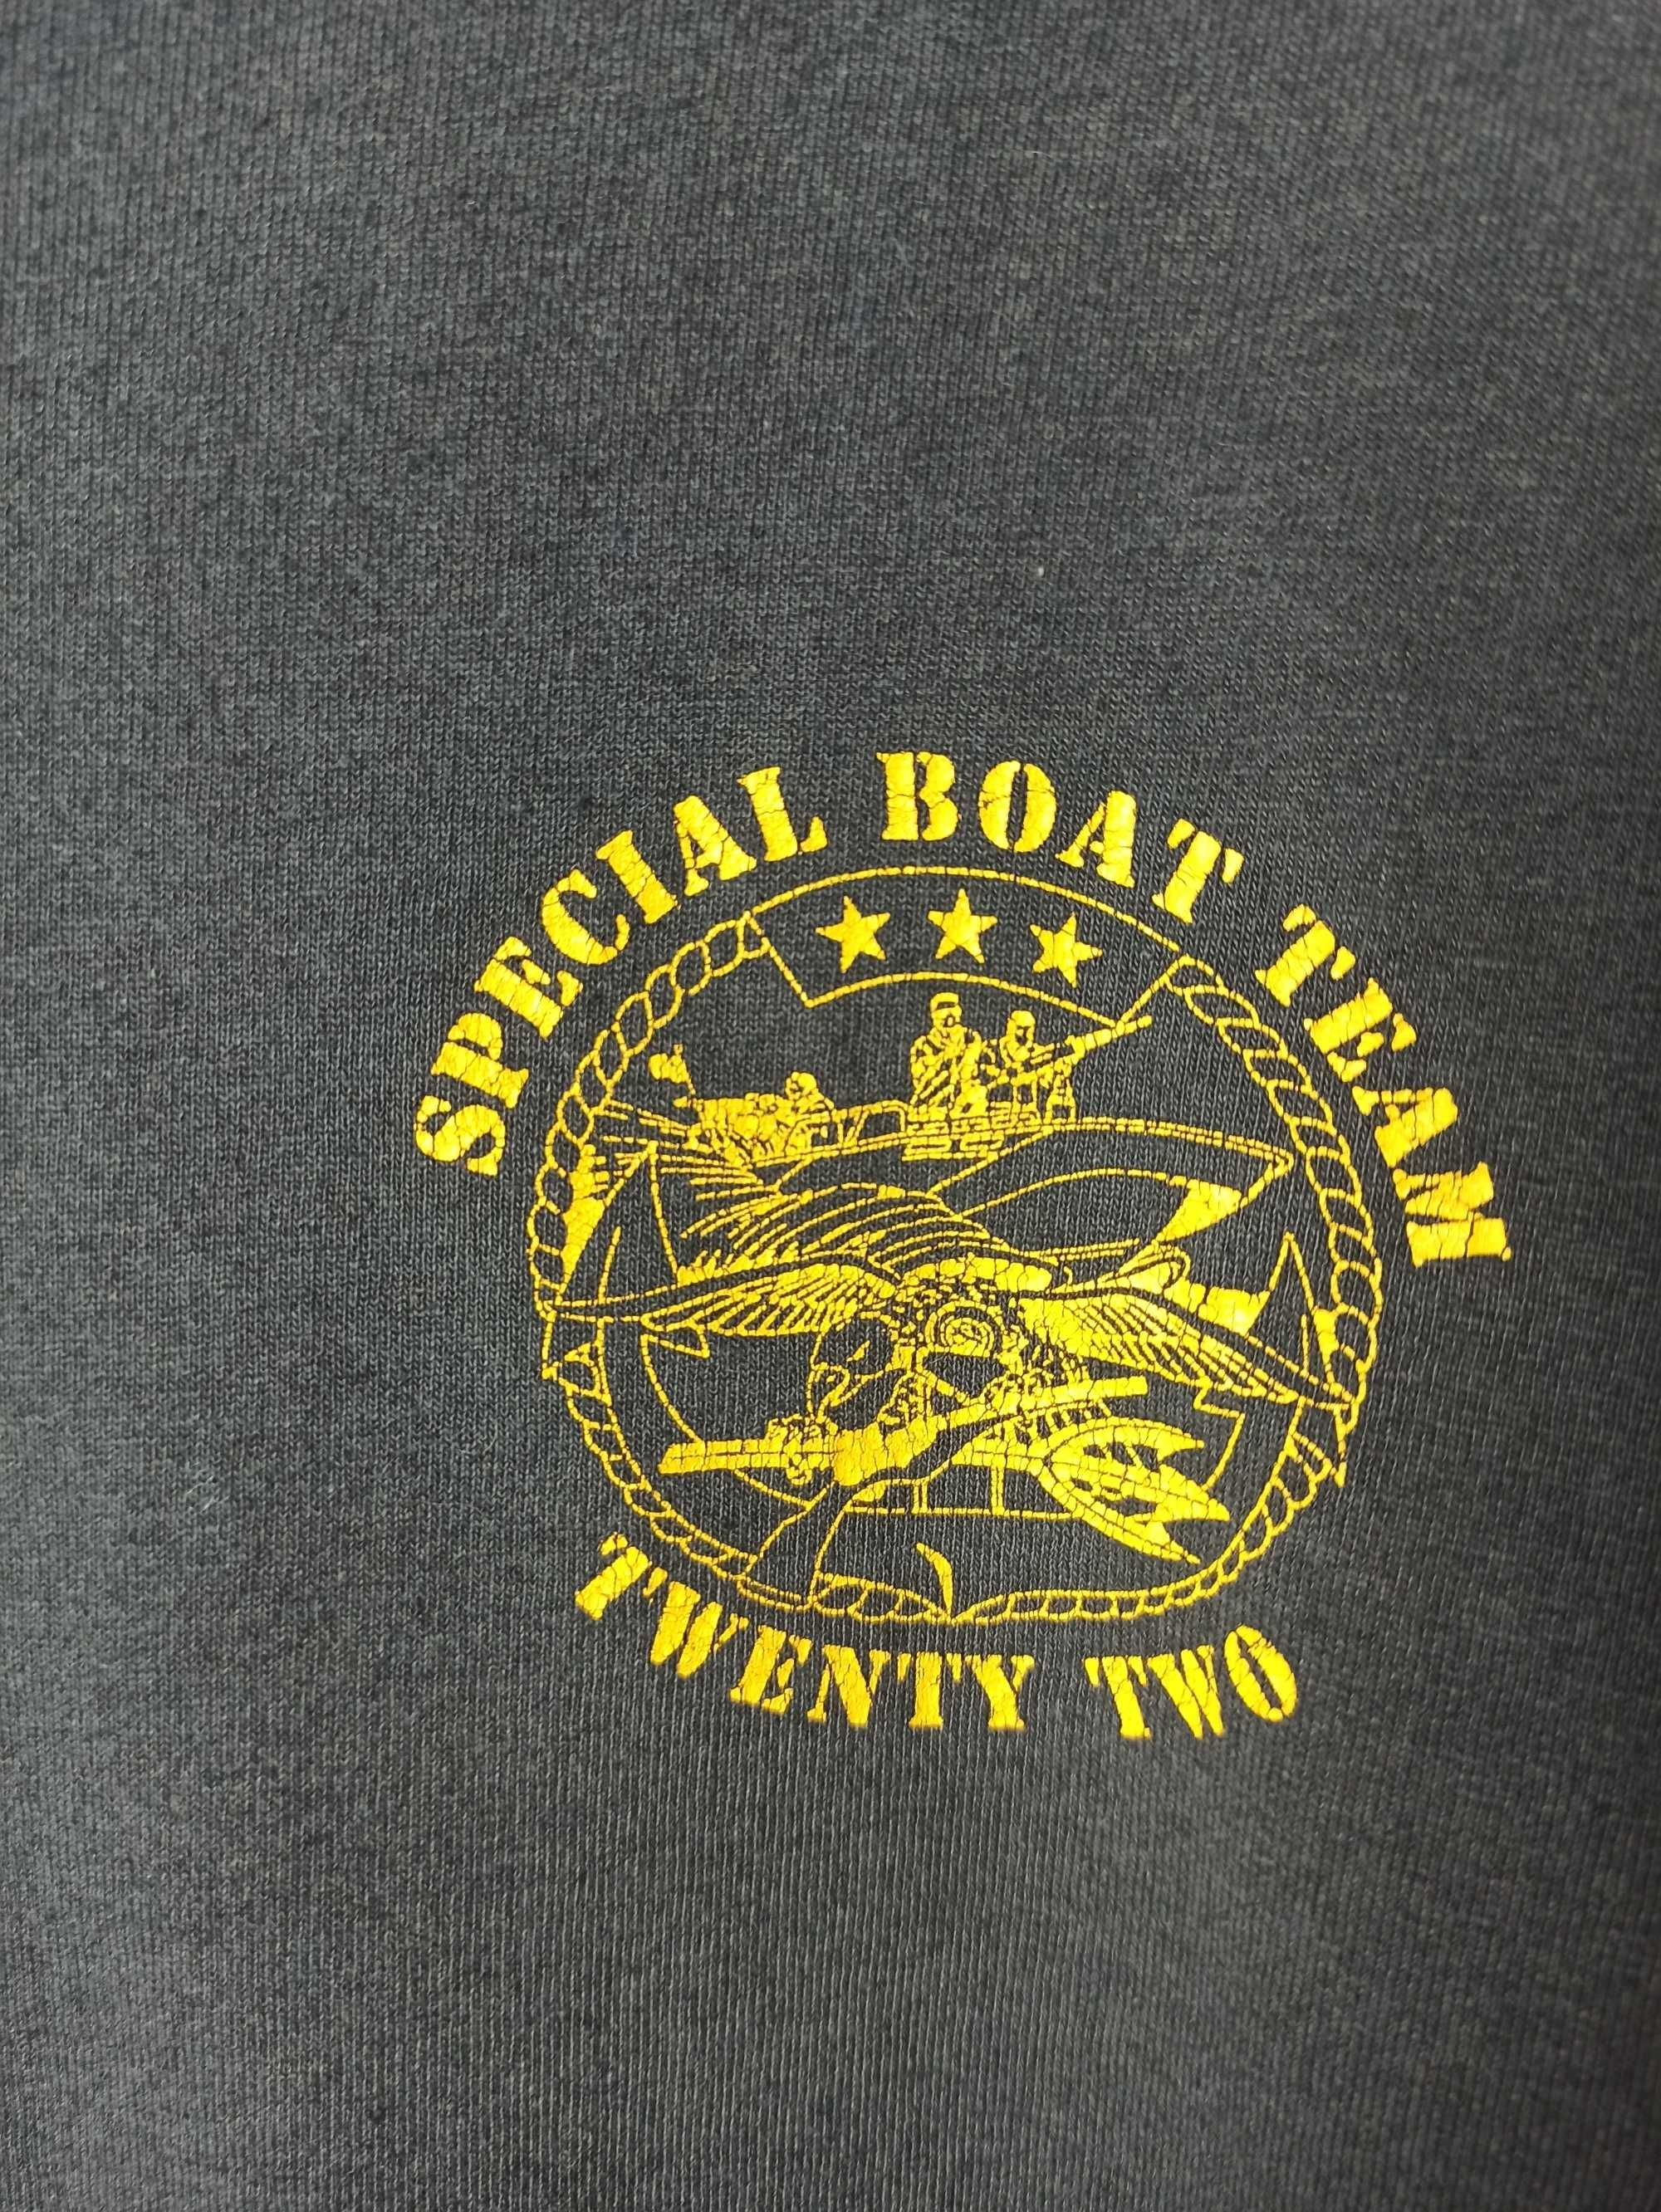 Special Boat Team Military US Marines Vintage Distressed T-shirt